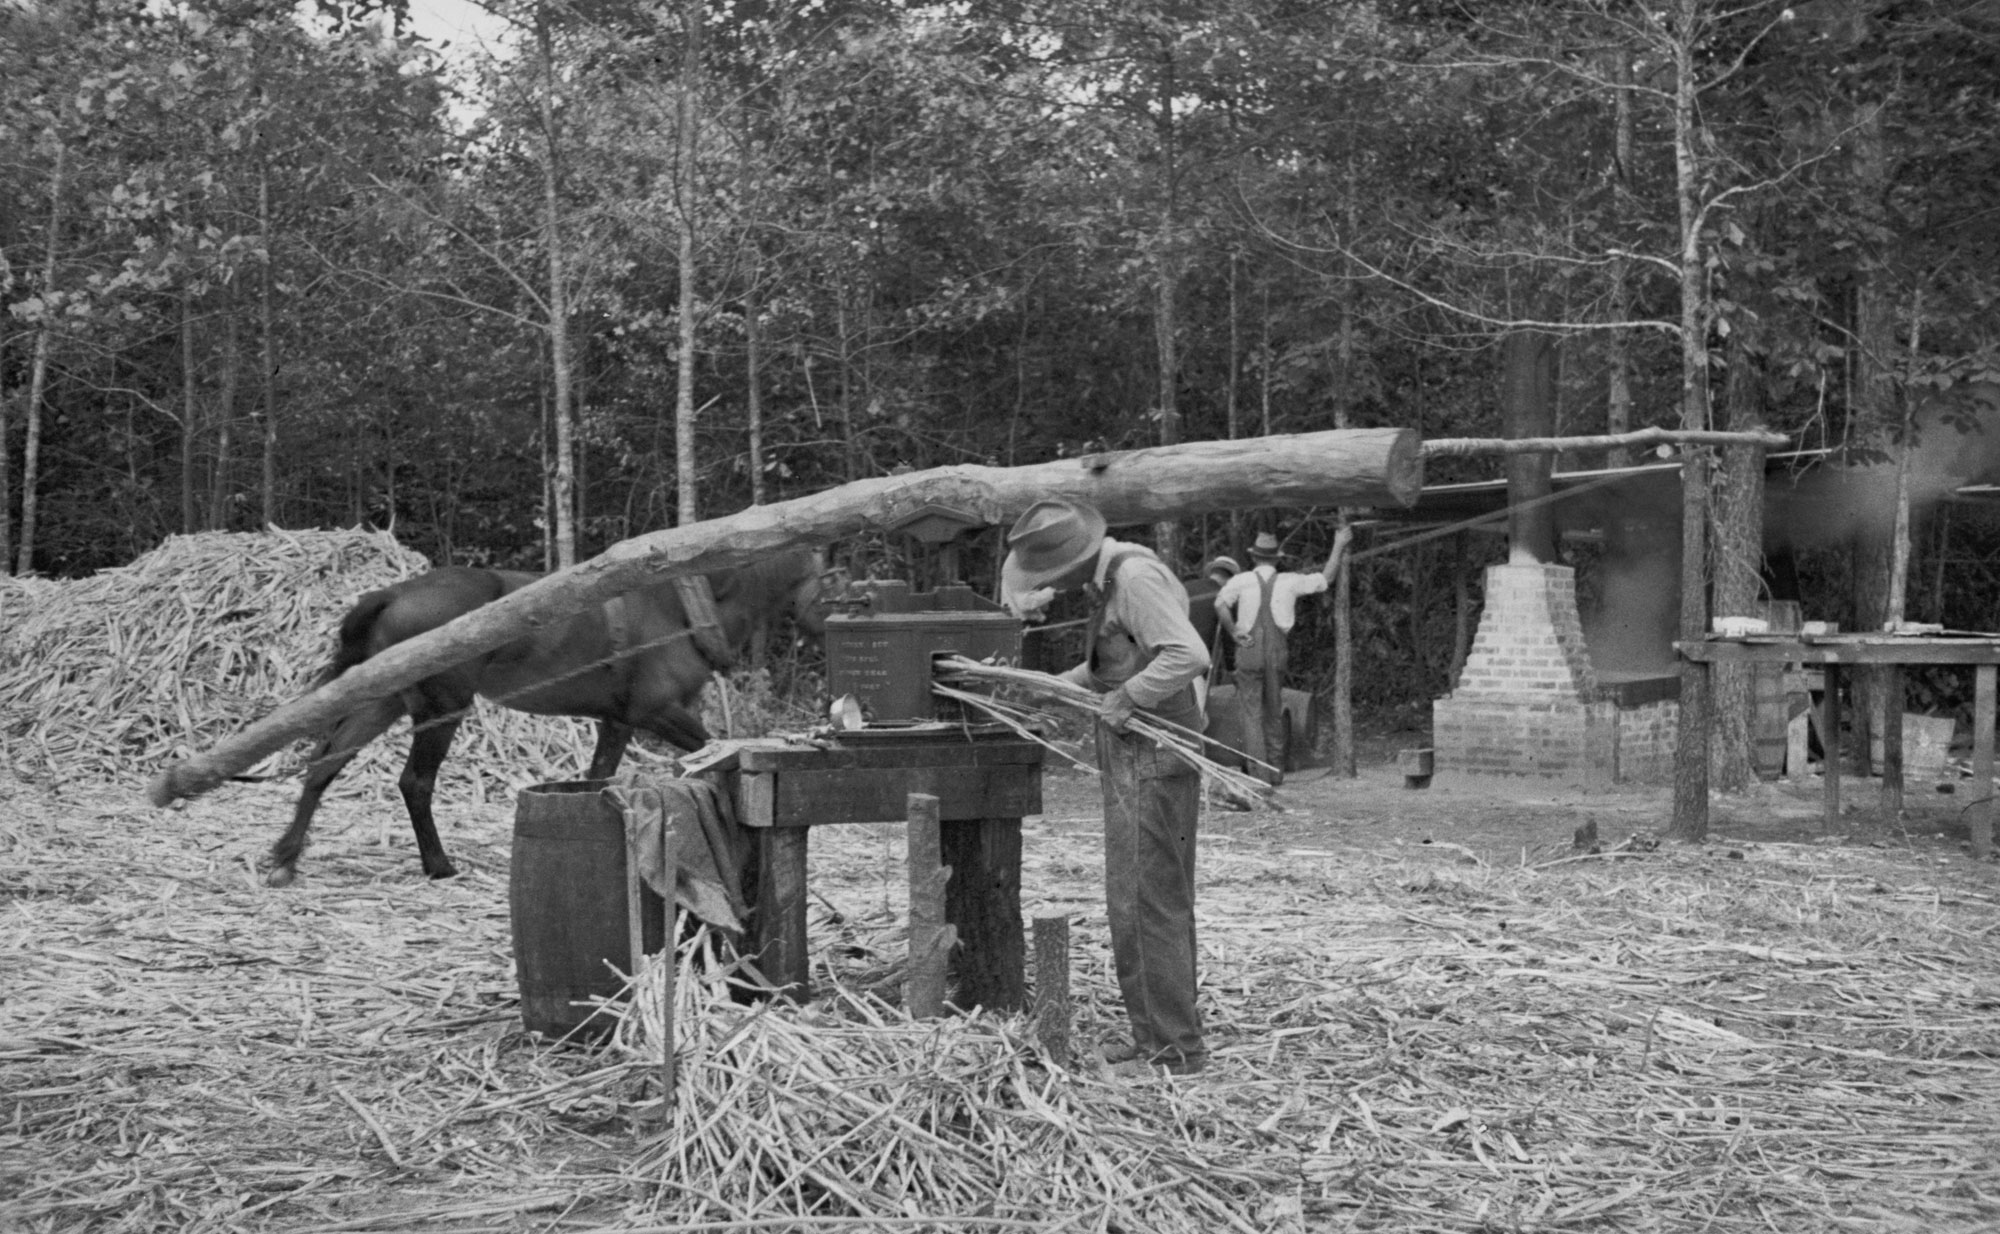 Black and white photograph of a man grinding sweet sorghum stalks to make sorghum syrup. The photo shows a man feeding sorghum stalks into a grinder. A pole is attached to the top of the grinder, and a horse attached to the opposite end of the pole is walking in a circle to operate the grinder.